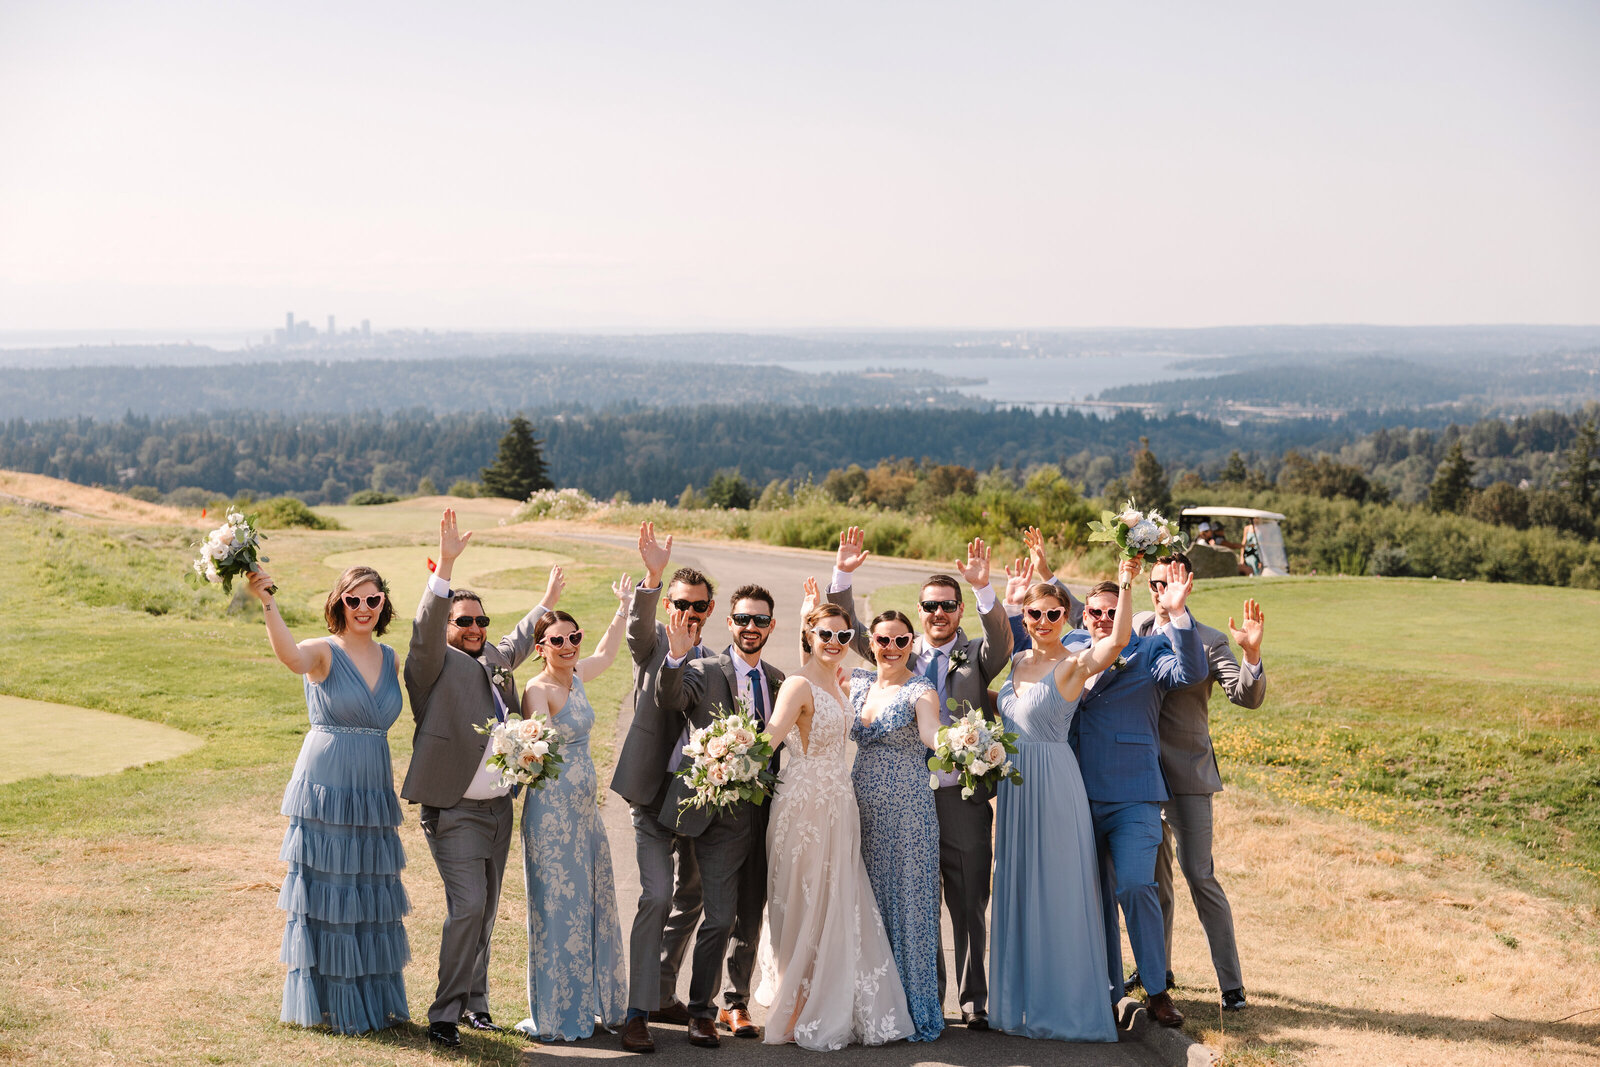 Bridal party wearing sunglasses standing on golf course